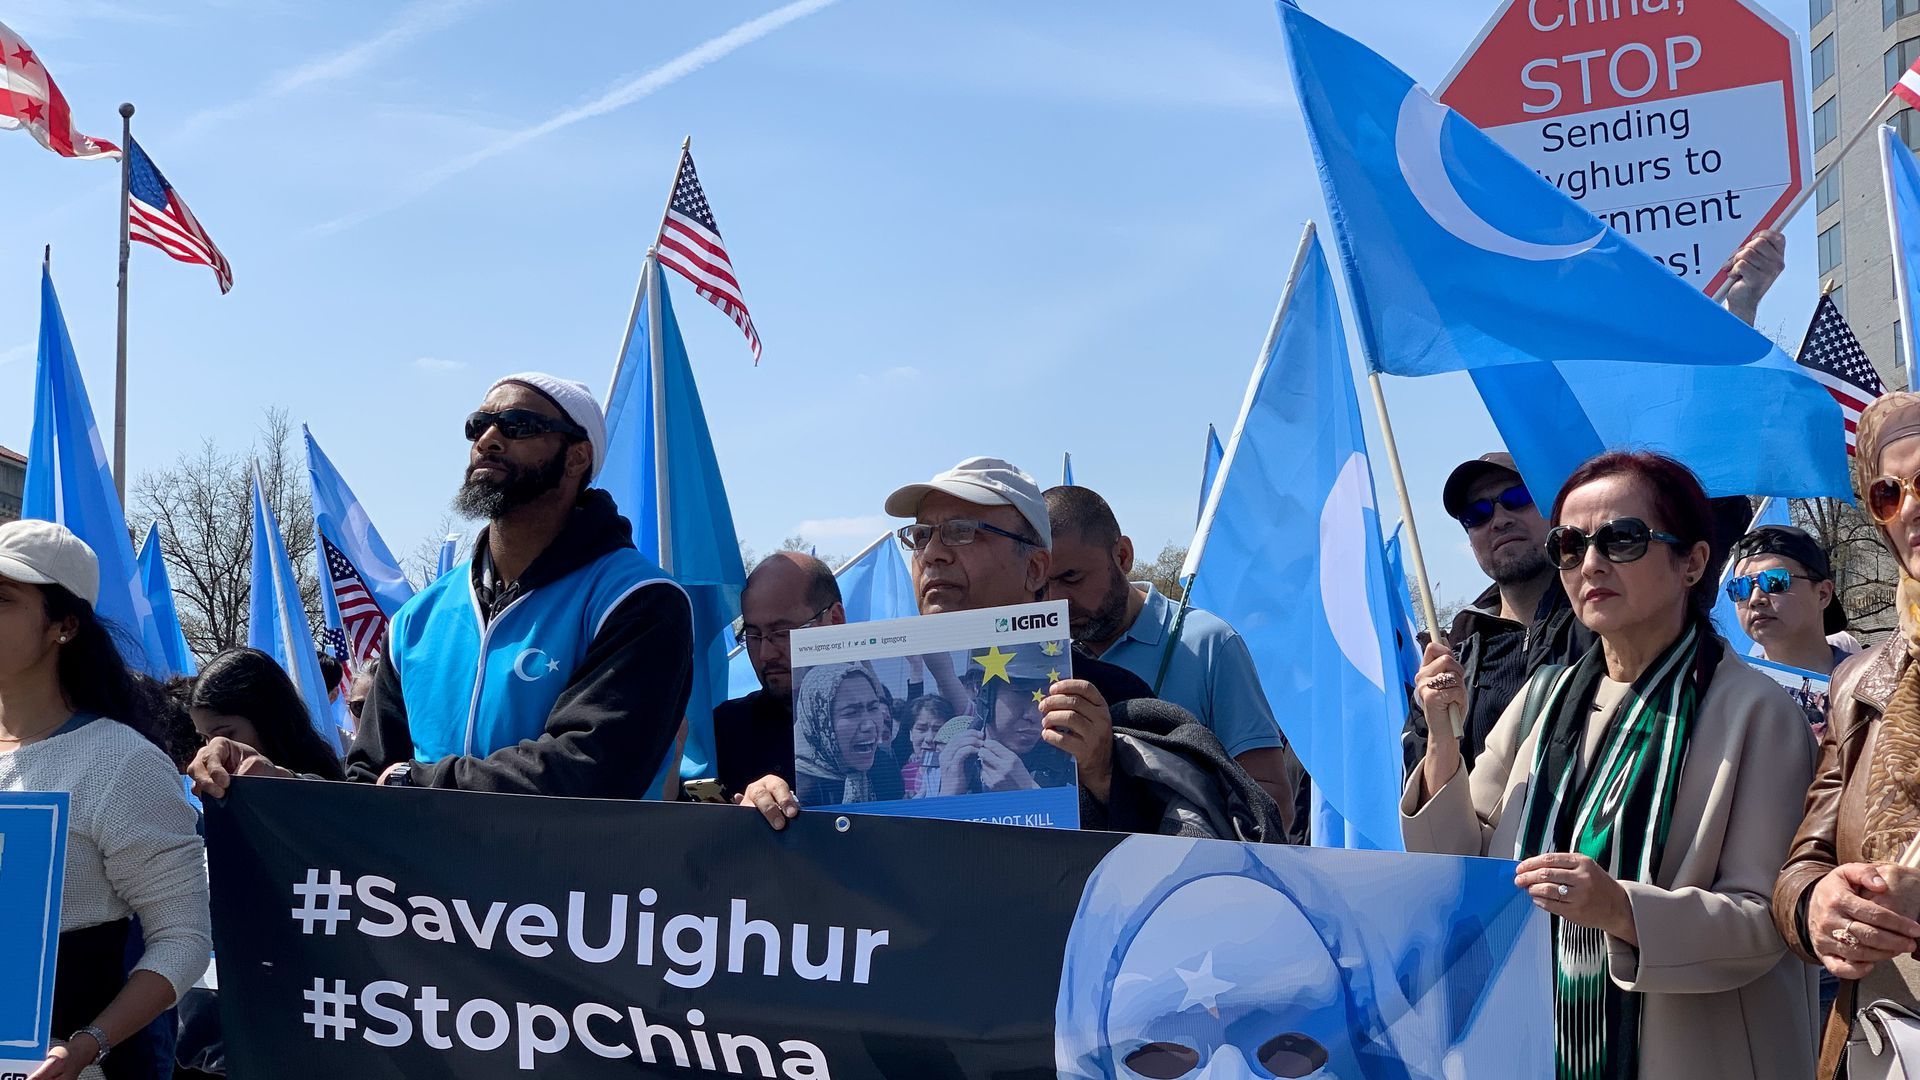 People protest China's human rights abuses against Uyghur Muslims in Xinjiang province on April 6, 2019, in Washington, D.C. 